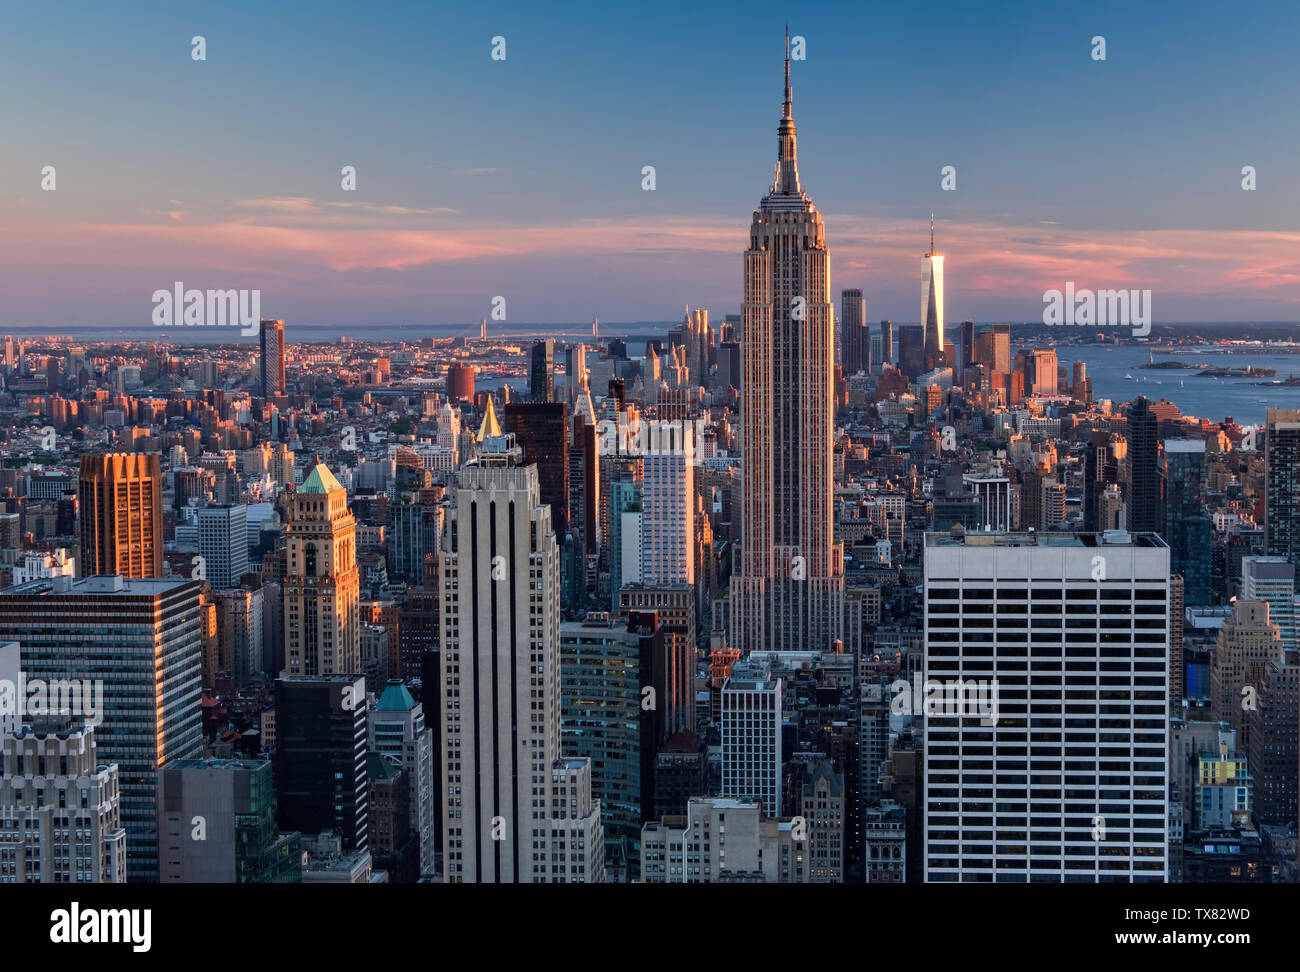 The Empire State Building & Lower Manhattan at sunset, New York, USA Stock Photo